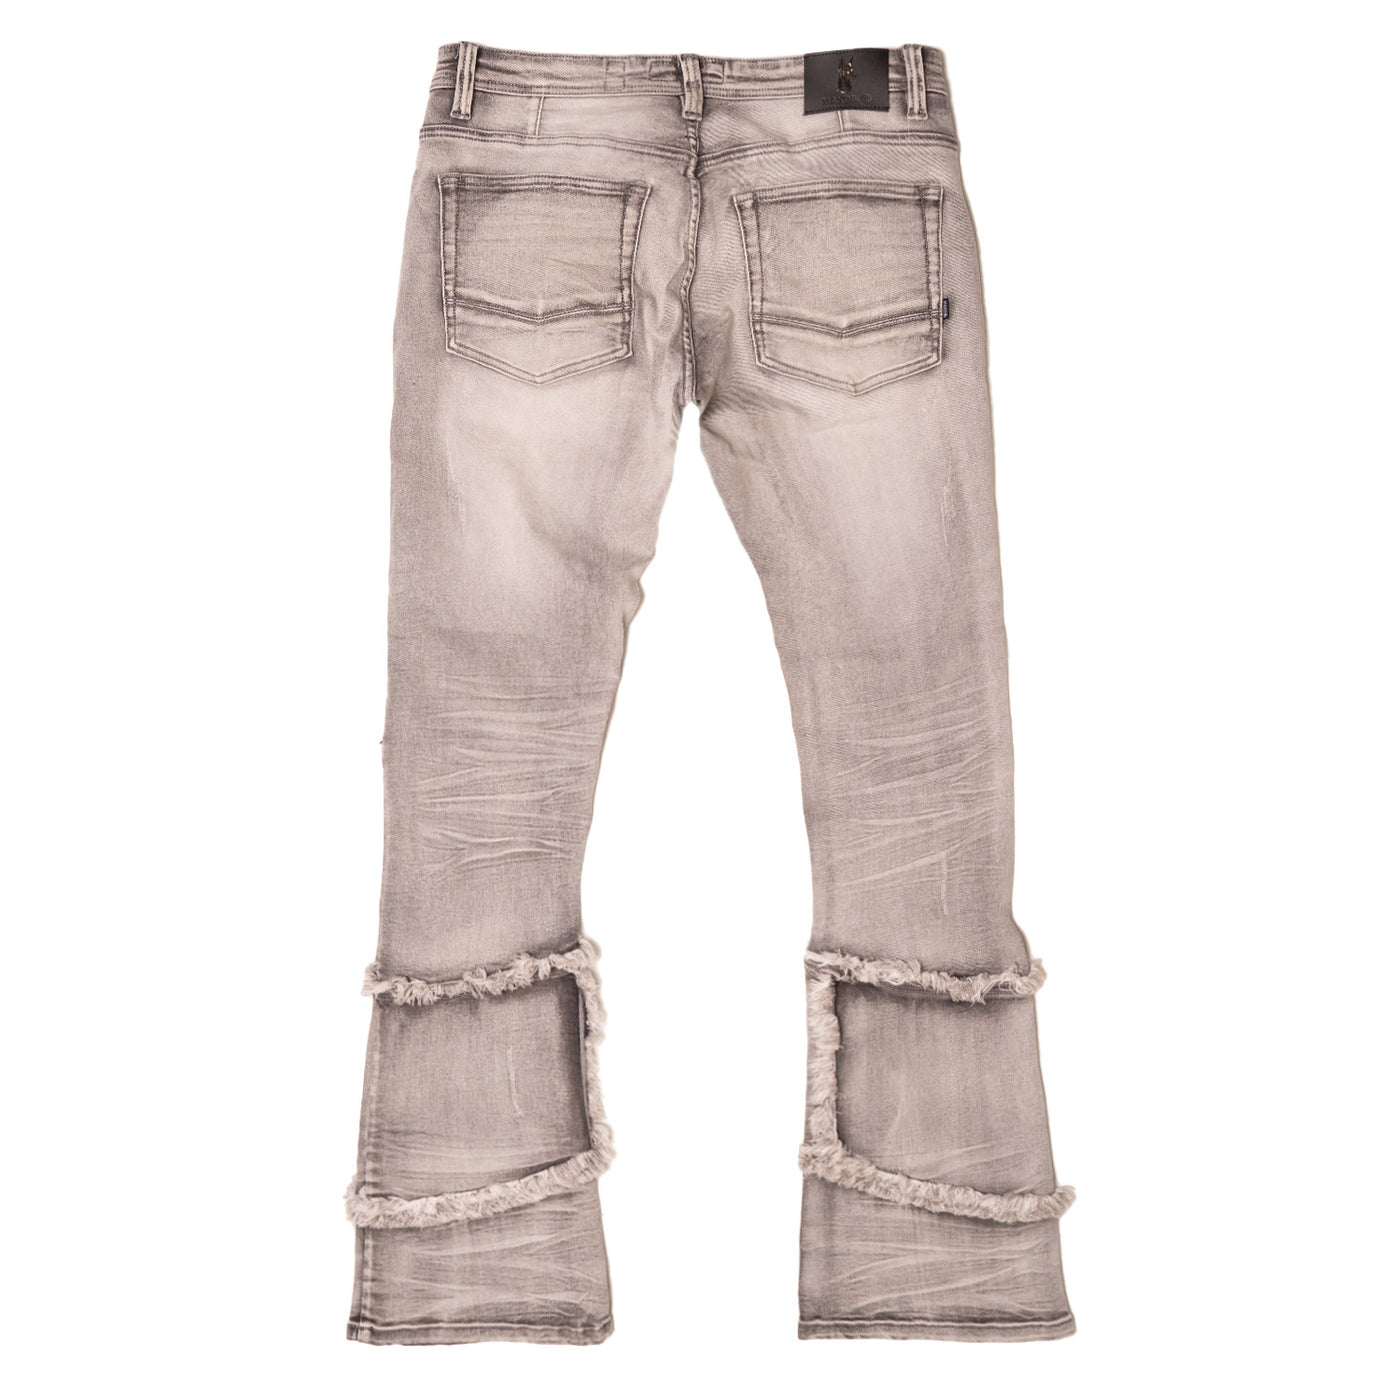 M1997 Gianos Stacked Jeans - Gray